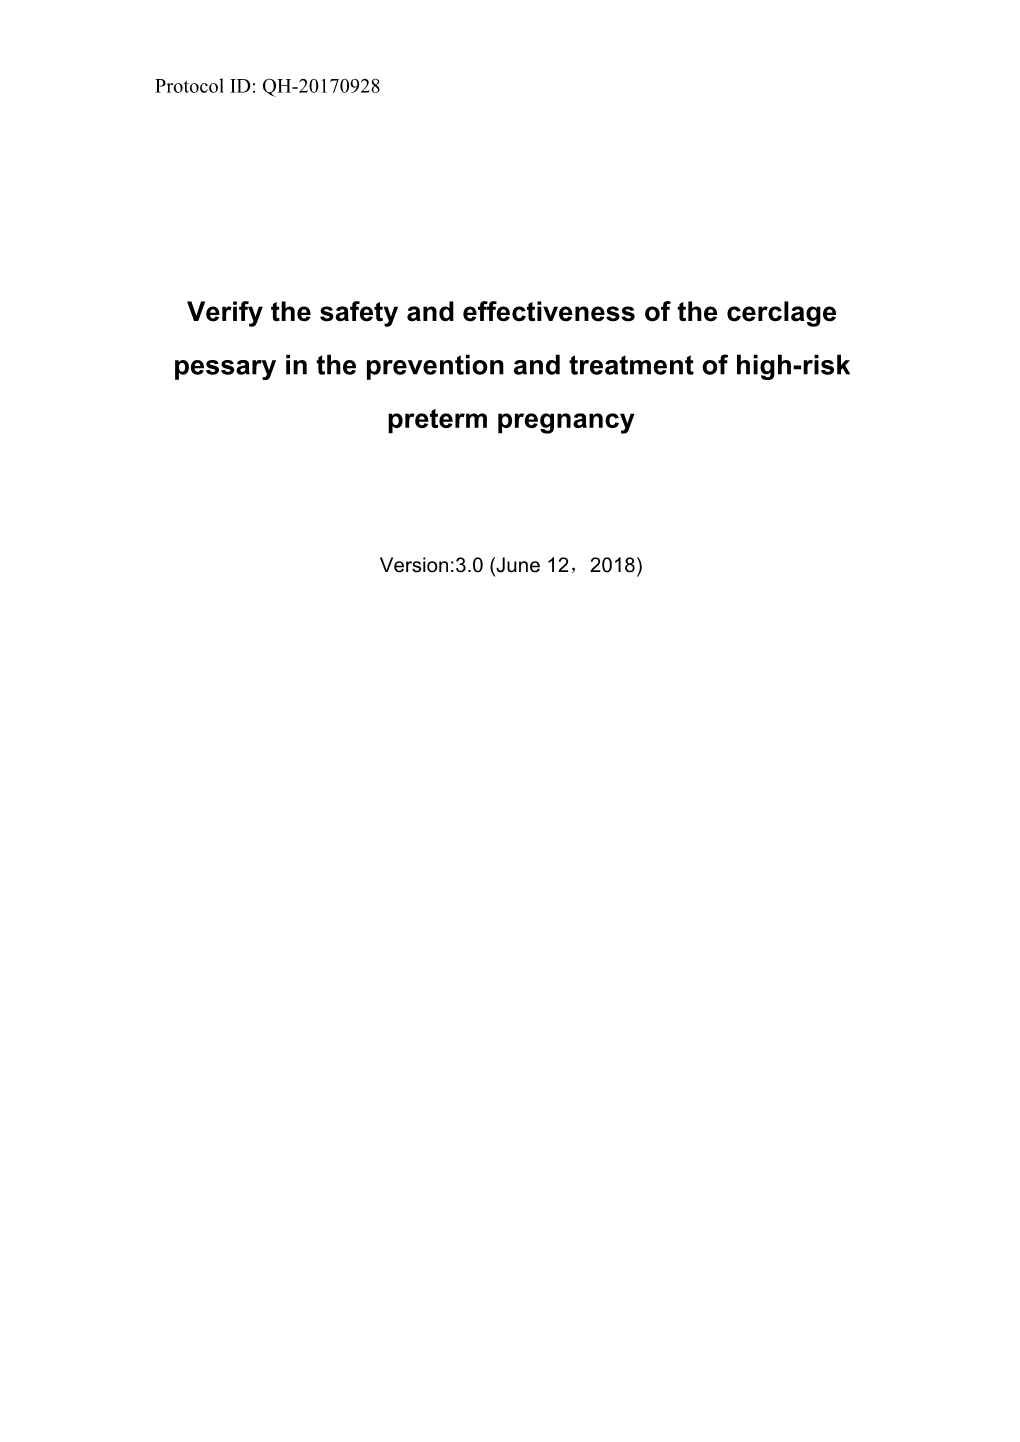 Verify the Safety and Effectiveness of the Cerclage Pessary in the Prevention and Treatment of High-Risk Preterm Pregnancy